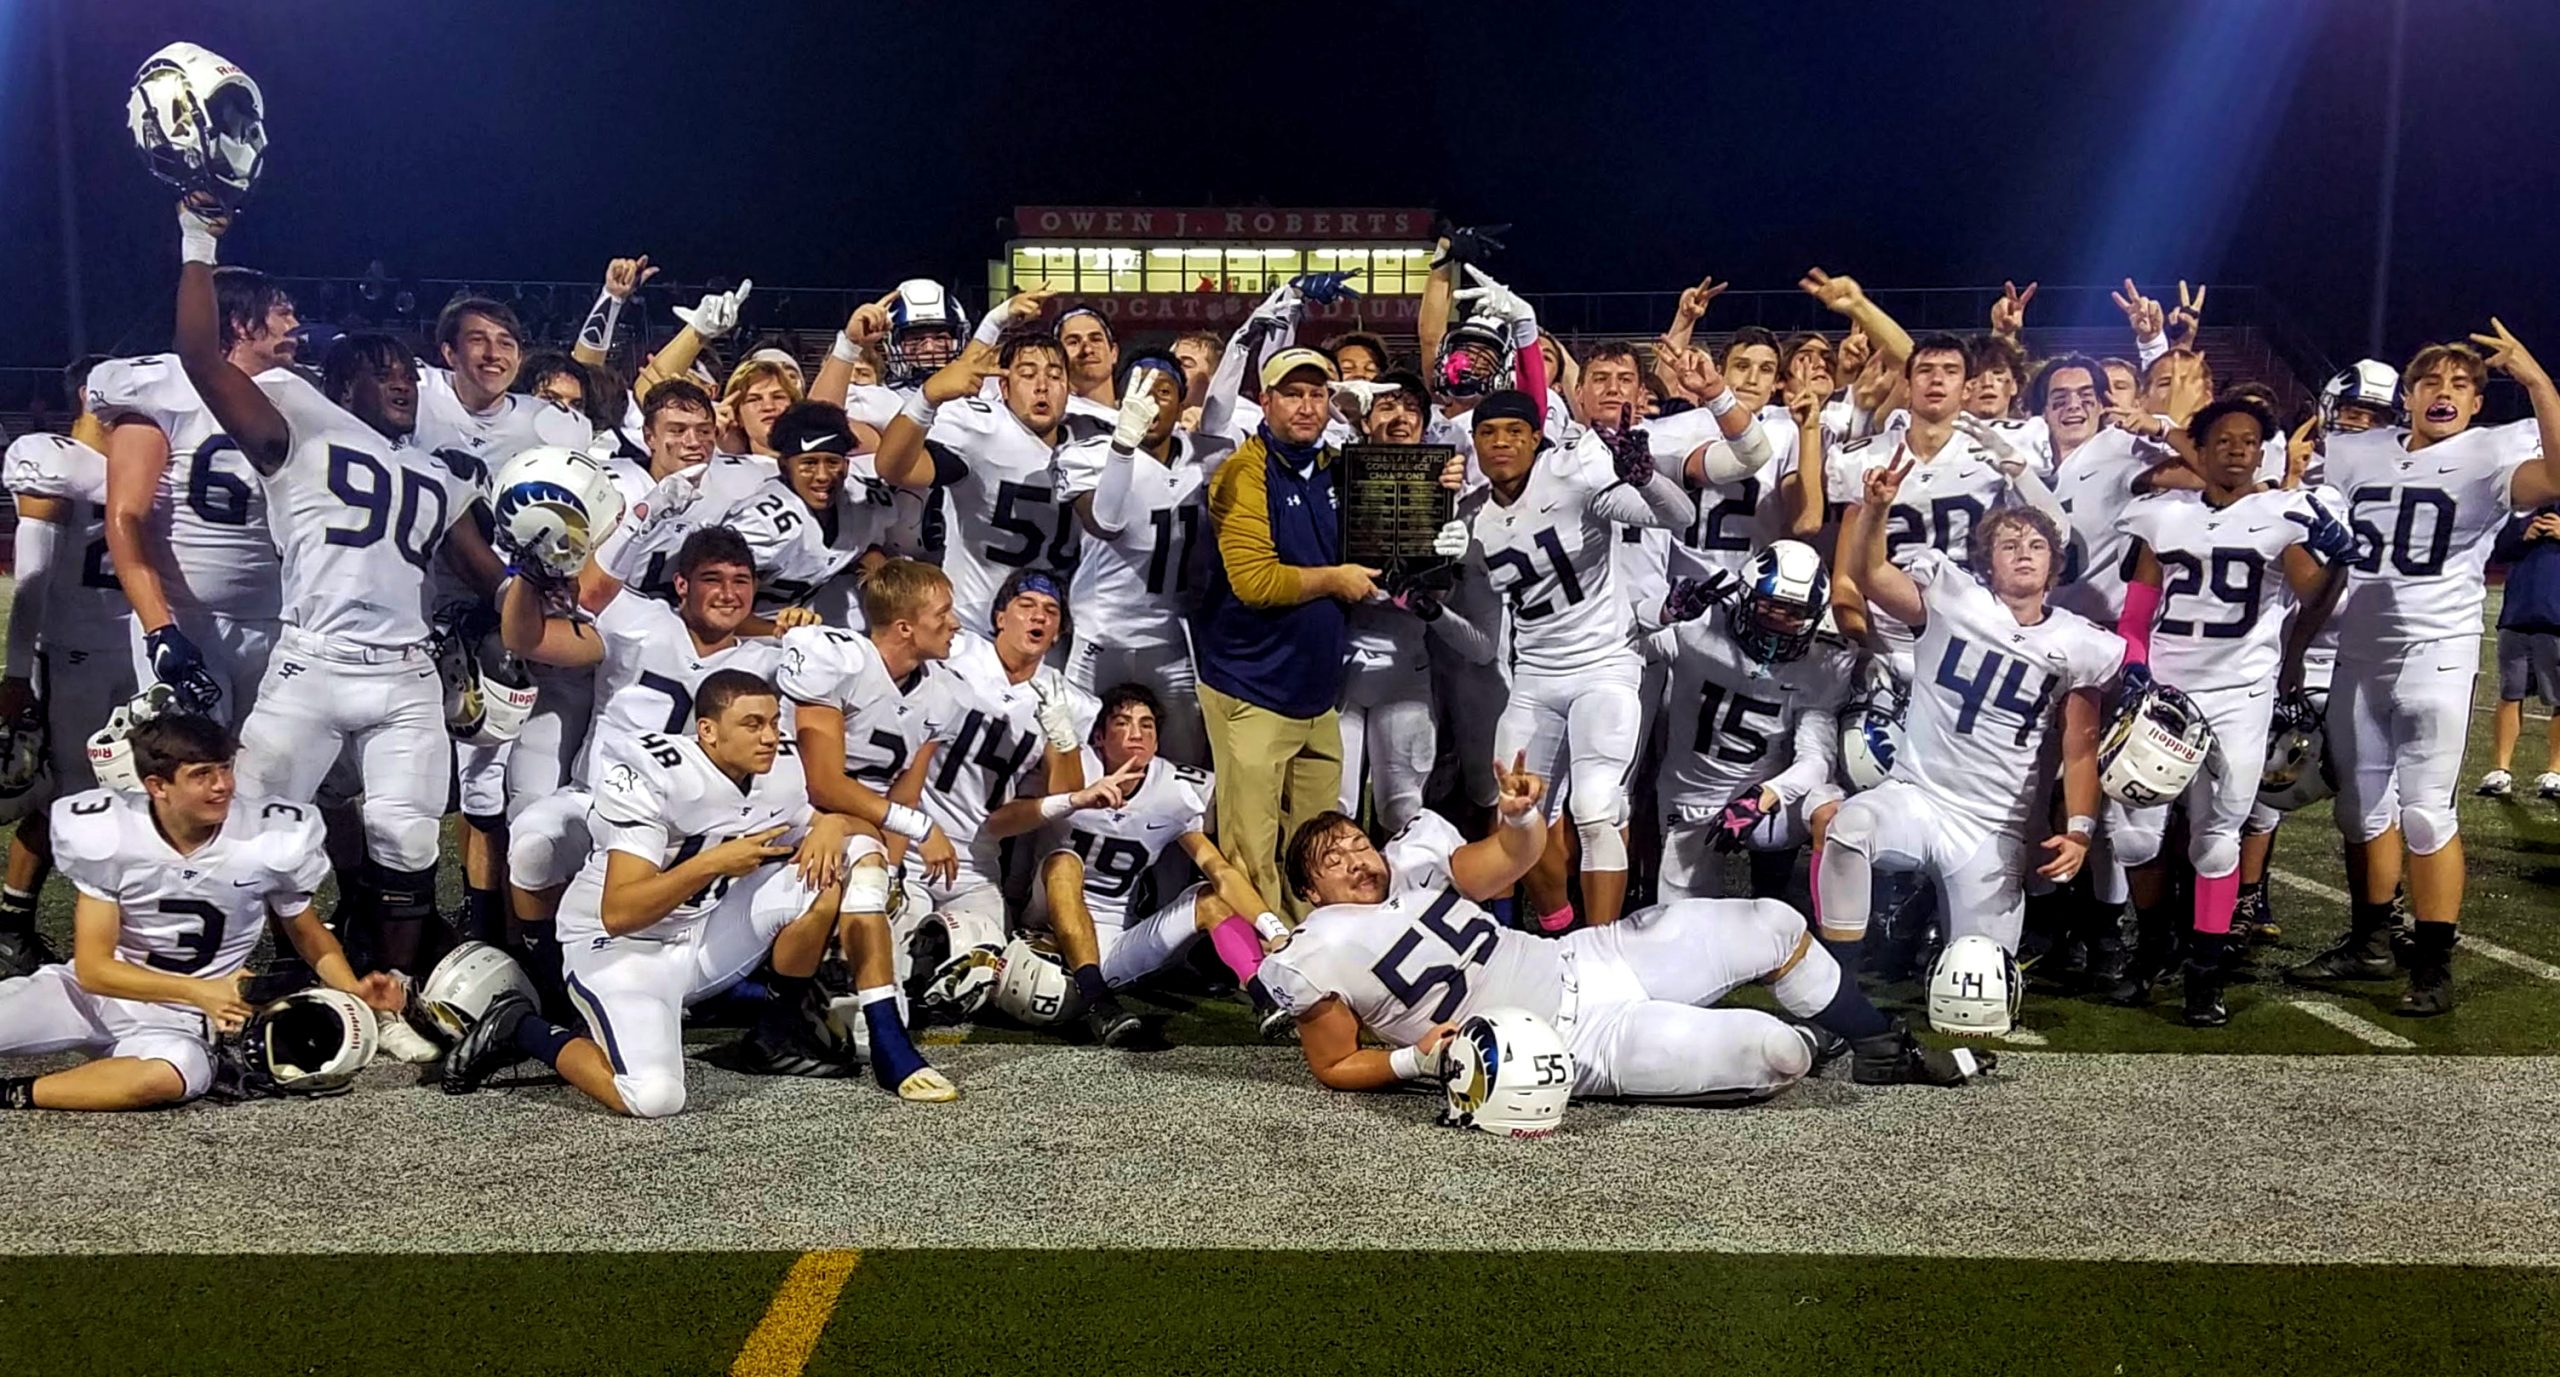 Stingy Spring-Ford shuts down OJR to repeat as PAC champions – PA Prep Live